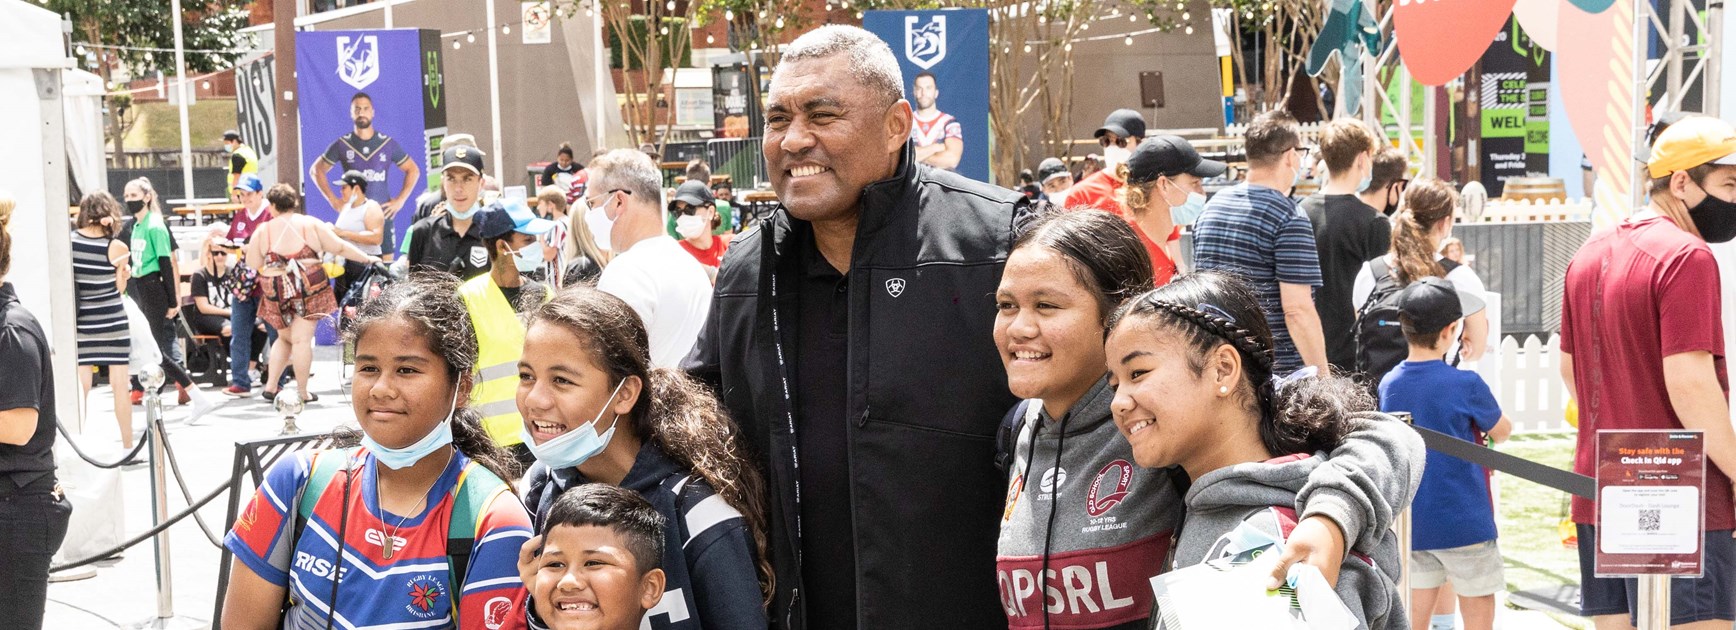 Rugby league legend Petero Civoniceva poses with fans.